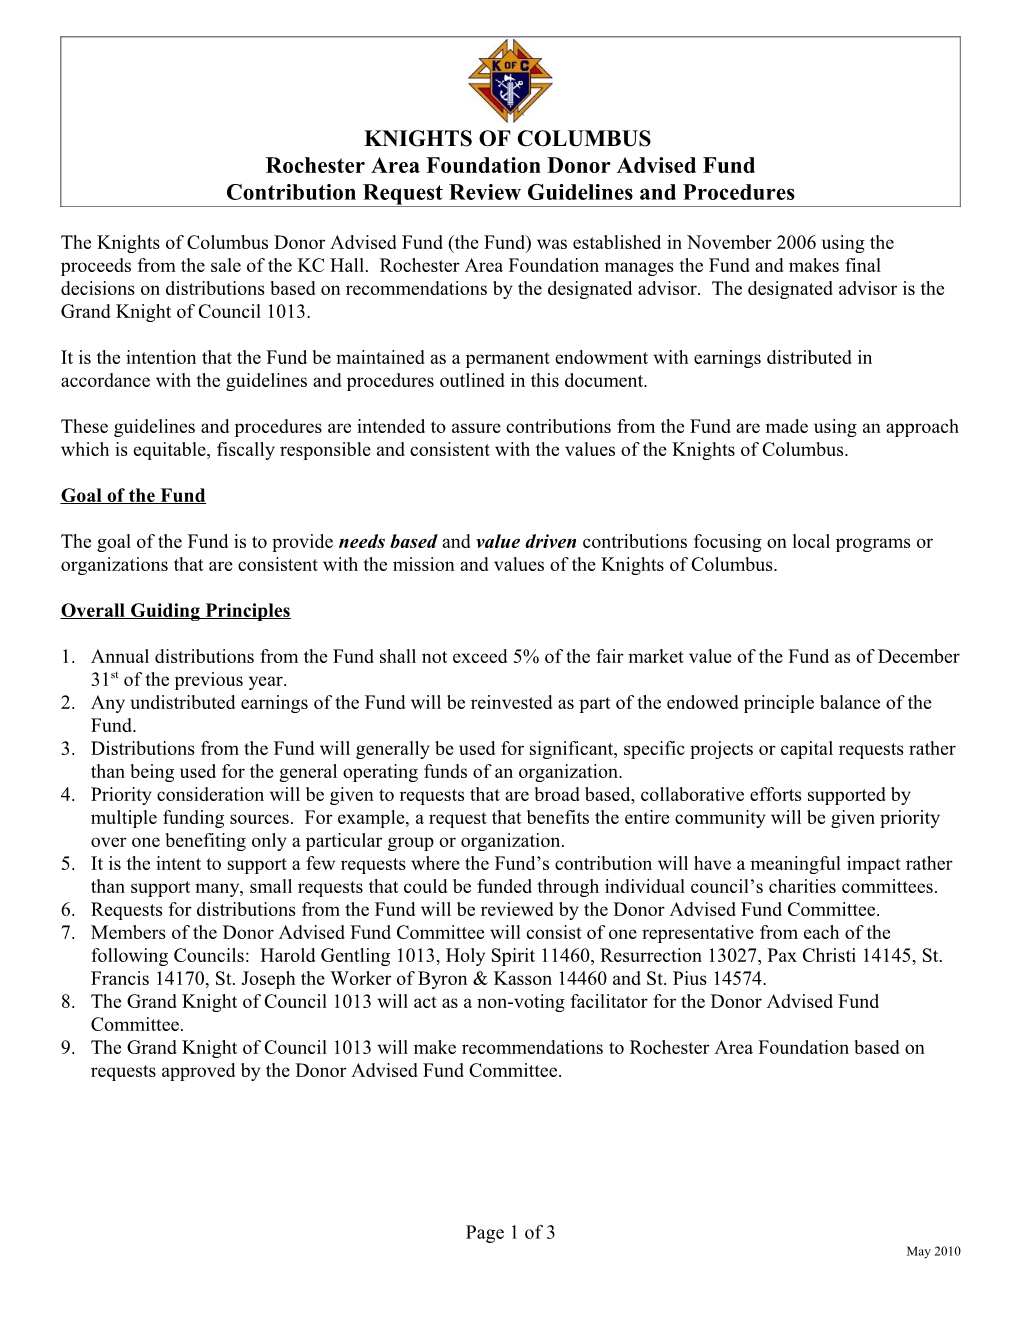 Policy (Guidelines) for Mayo S Participation in Capital Campaigns (Capital Campaign Grants